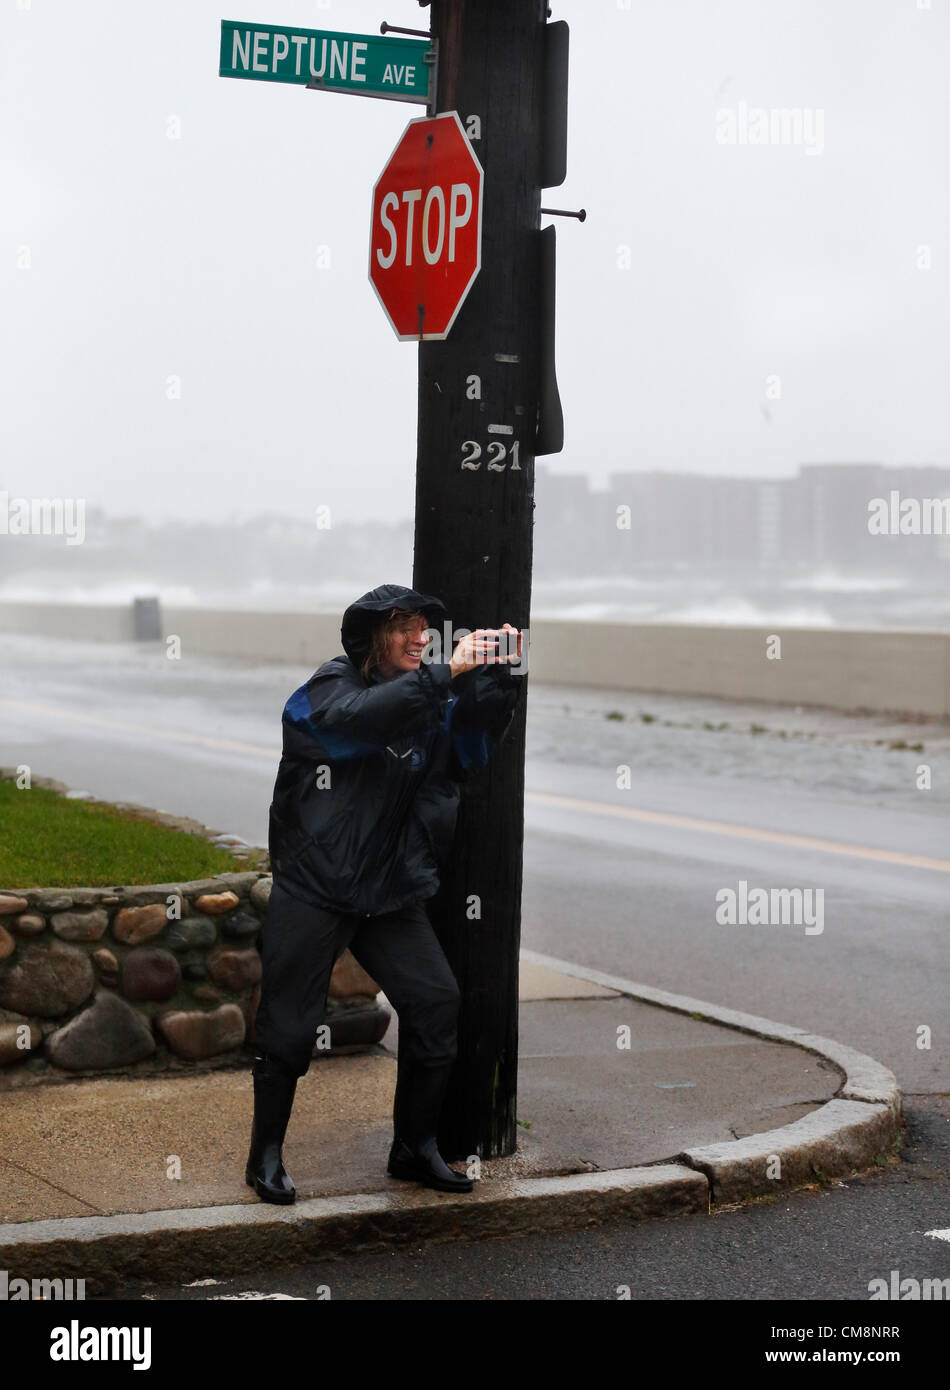 Winthrop, Massachusetts, USA. A woman braces herself against the wind from Hurricane Sandy as she photographs the waves coming ashore in Winthrop, Massachusetts, Monday, Oct. 29, 2012. The huge weather system  is predicted  to make landfall in southern New Jersey late Monday and is affecting weather up and down the East Coast of the United States. Stock Photo